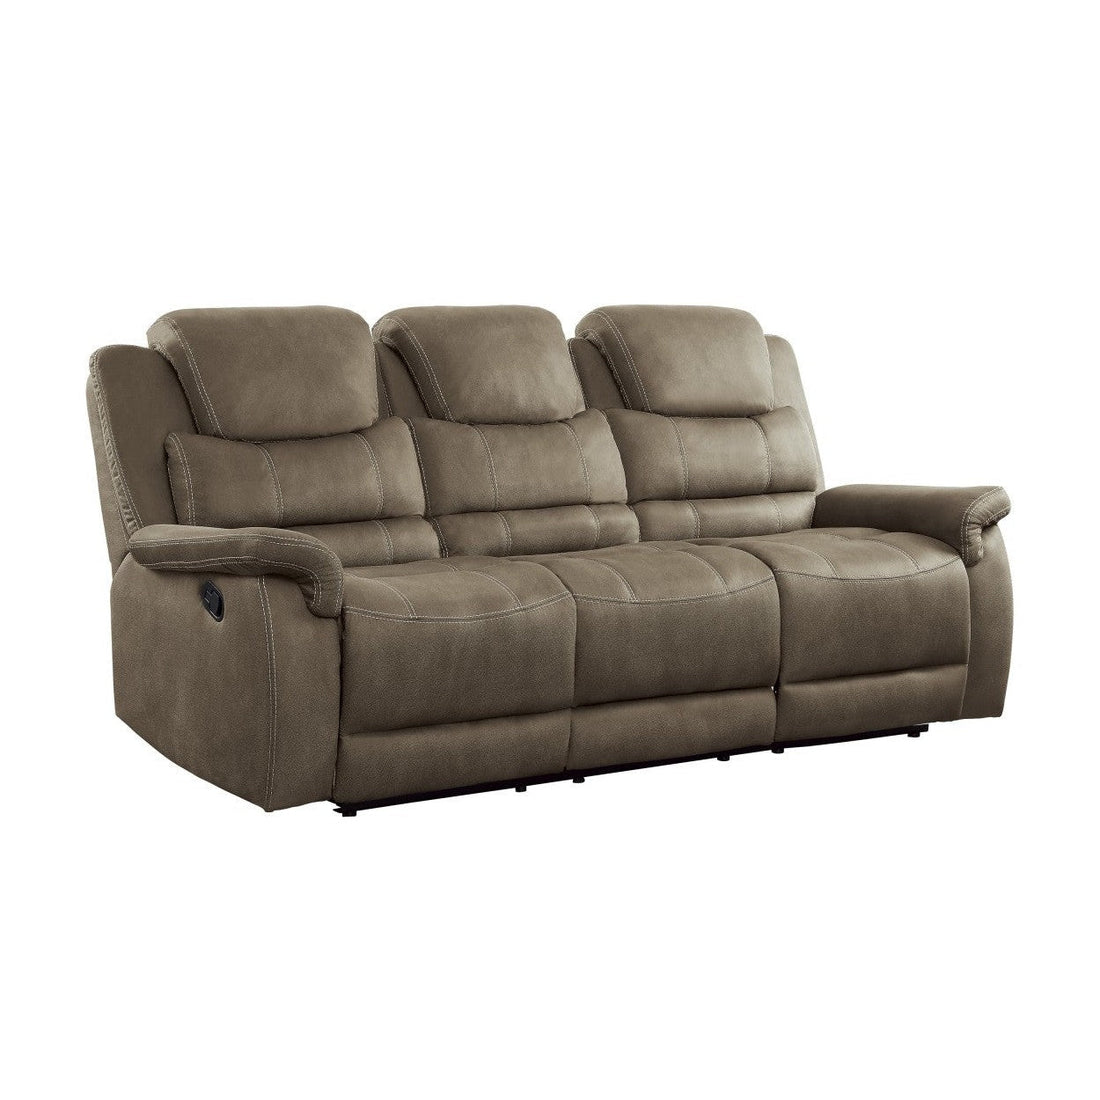 DOUBLE RECLINING SOFA WITH DROP DOWN CUP HOLDERS &amp; RECEPTACLES, BROWN 100% POLYESTER 9848BR-3